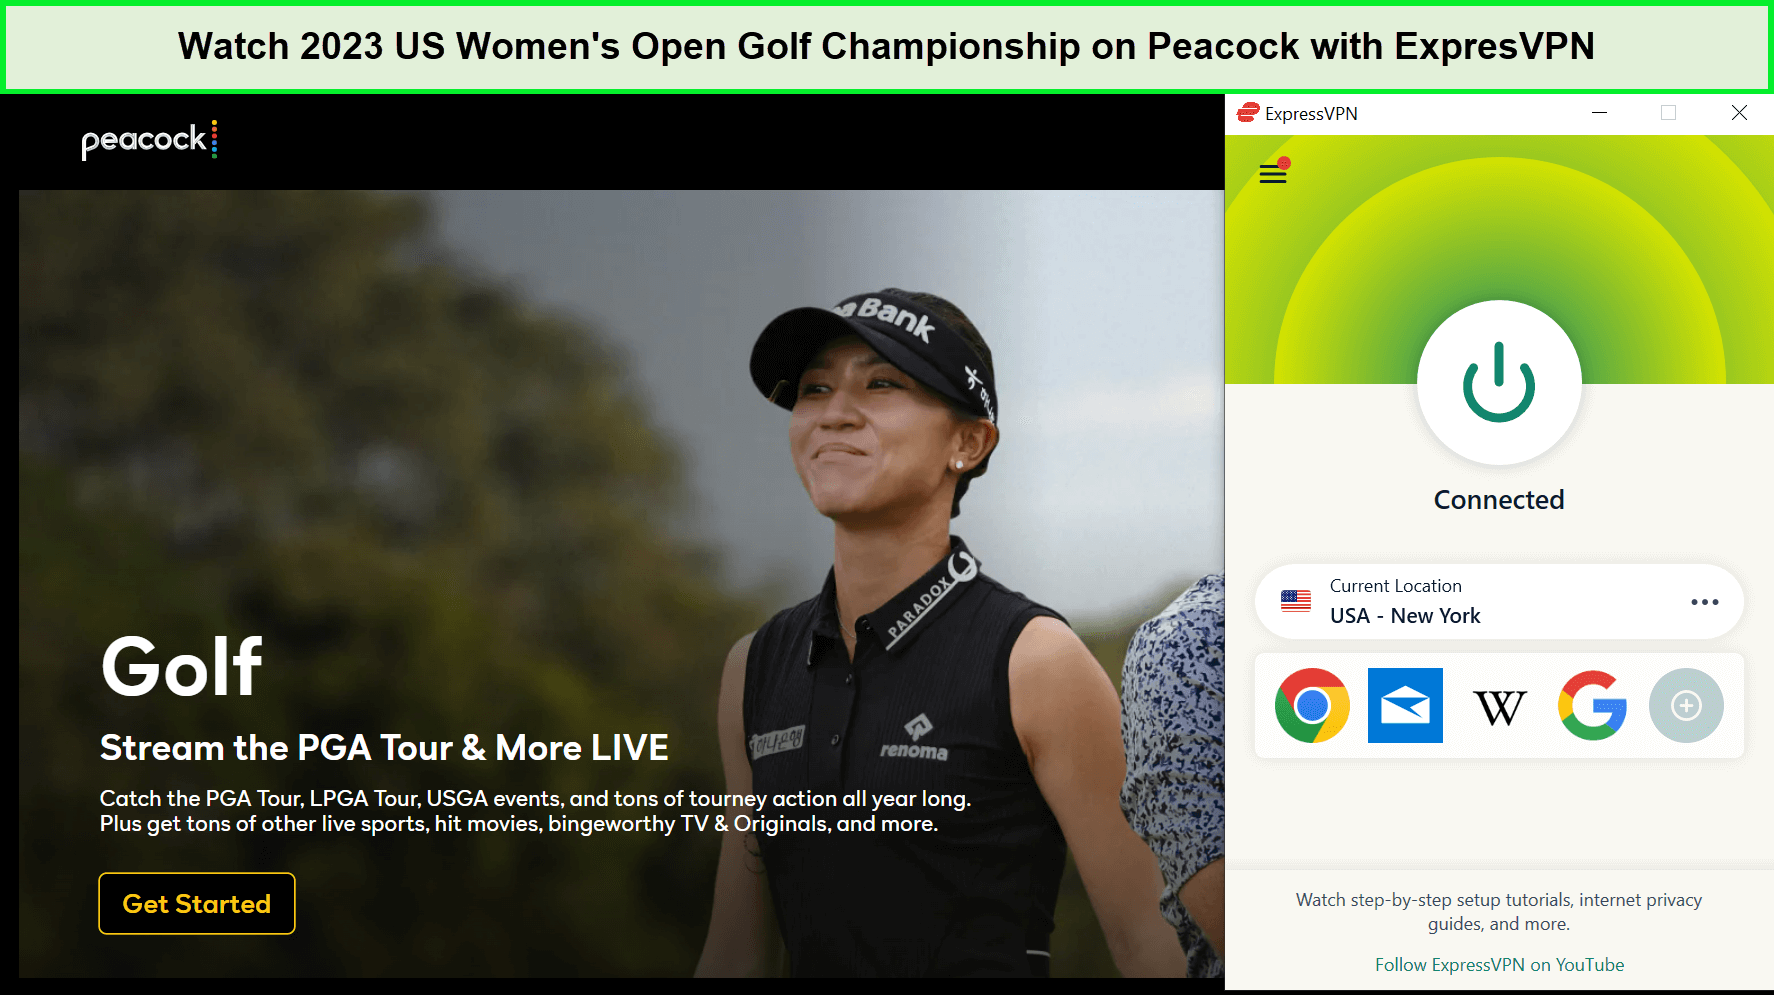 Watch-2023-US-Womens-Open-Golf-Championship-in-UAE-on-Peacock-with-ExpresVPN